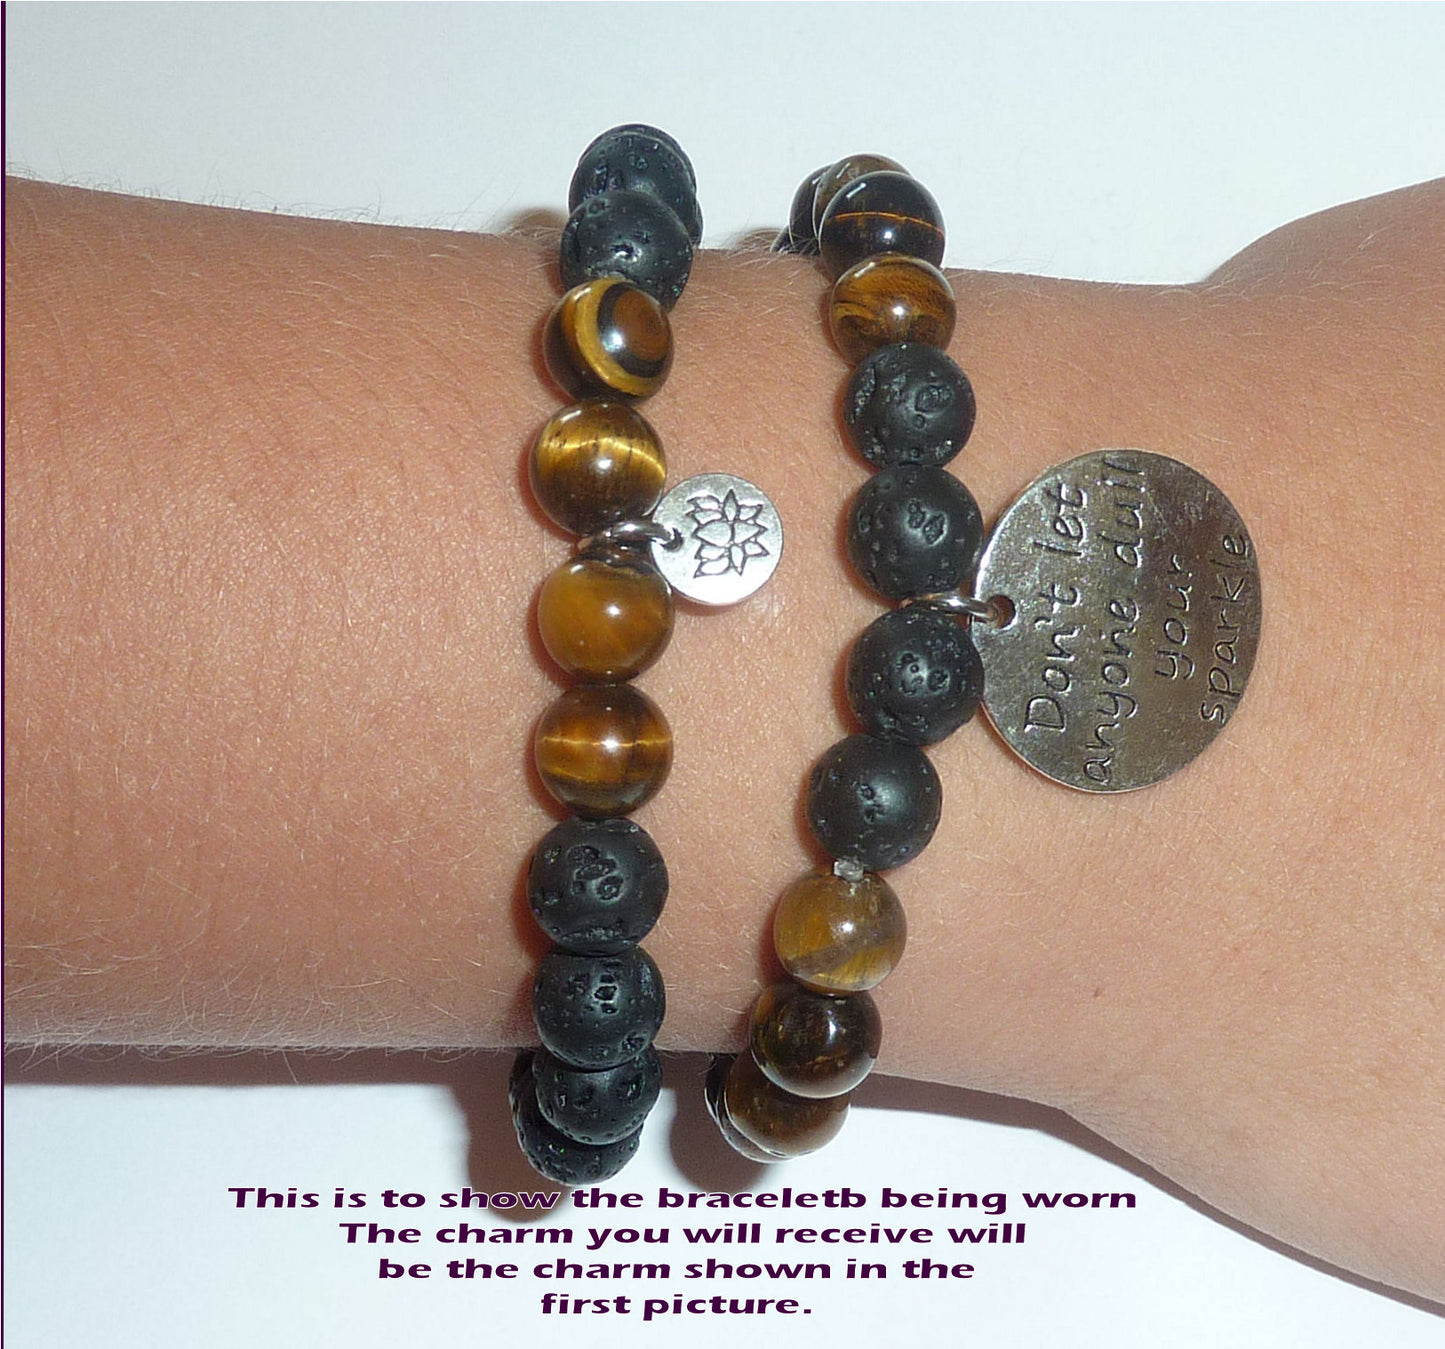 You Were Given This Life - Women's Tiger Eye & Black Lava Diffuser Yoga Beads Charm Stretch Bracelet Gift Set